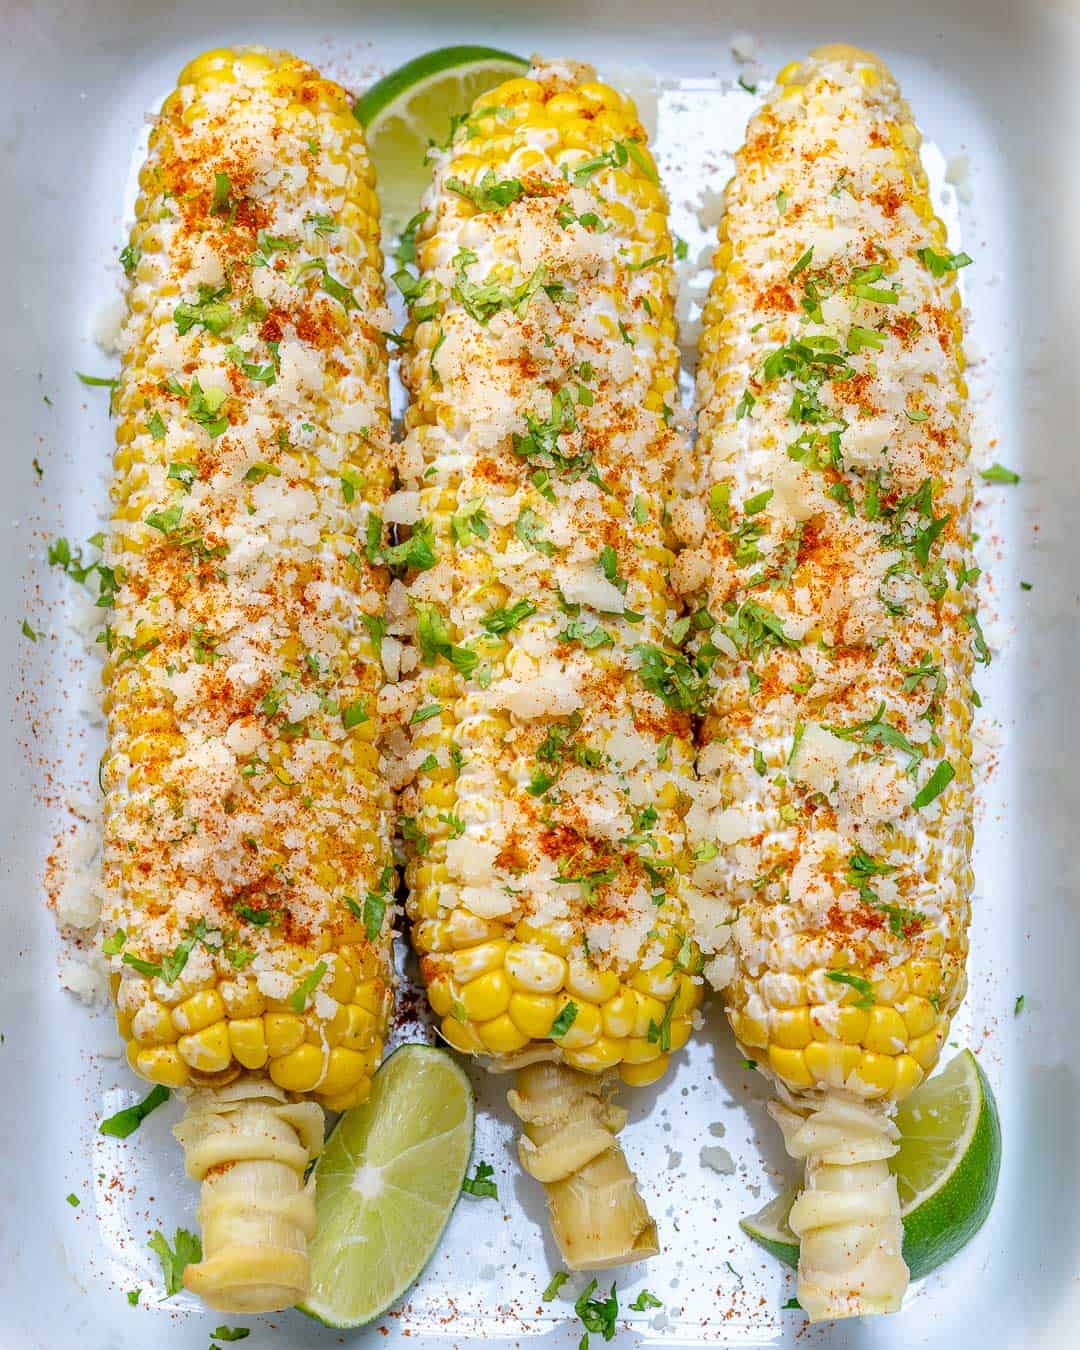 Chili's Mexican Street Corn Recipe : Grilled Mexican Street Corn Fit Foodie Finds